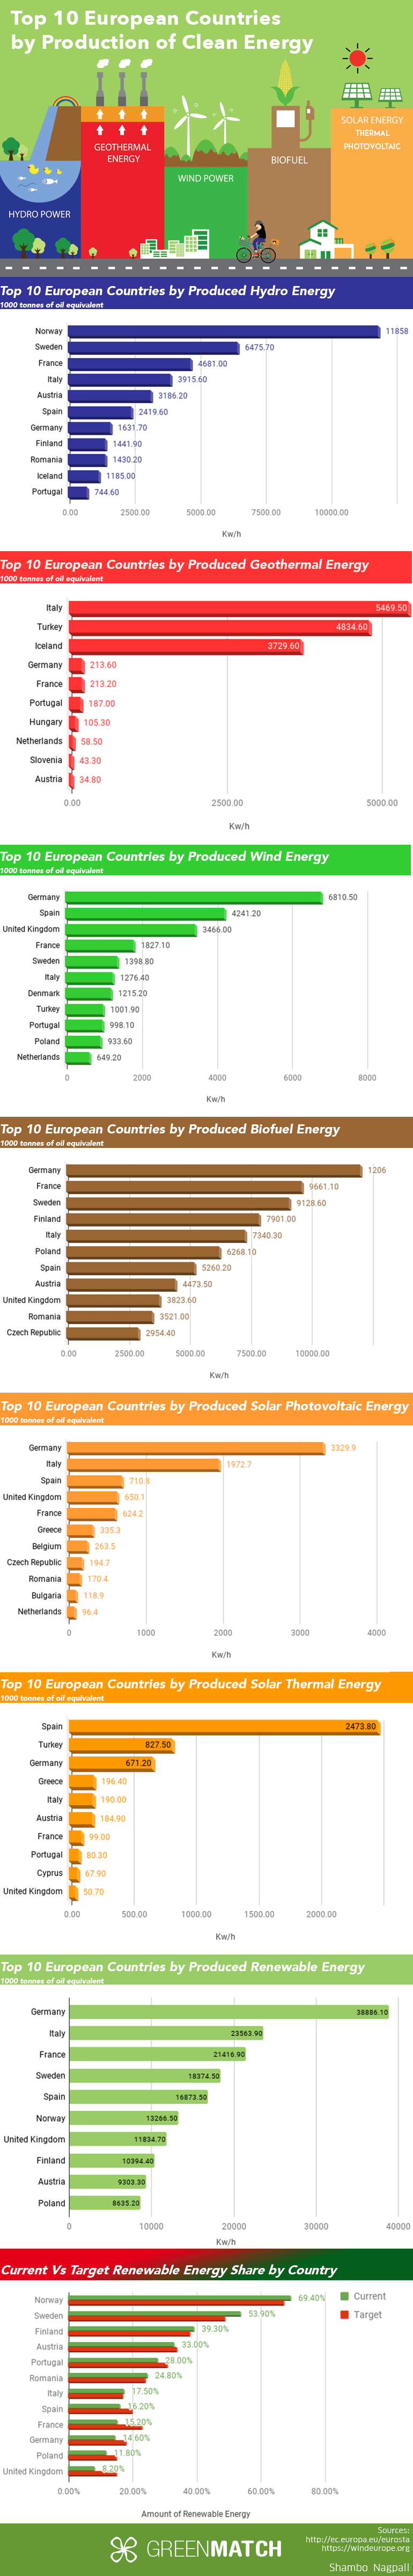 Top 10 Countries by Production of Clean Energy